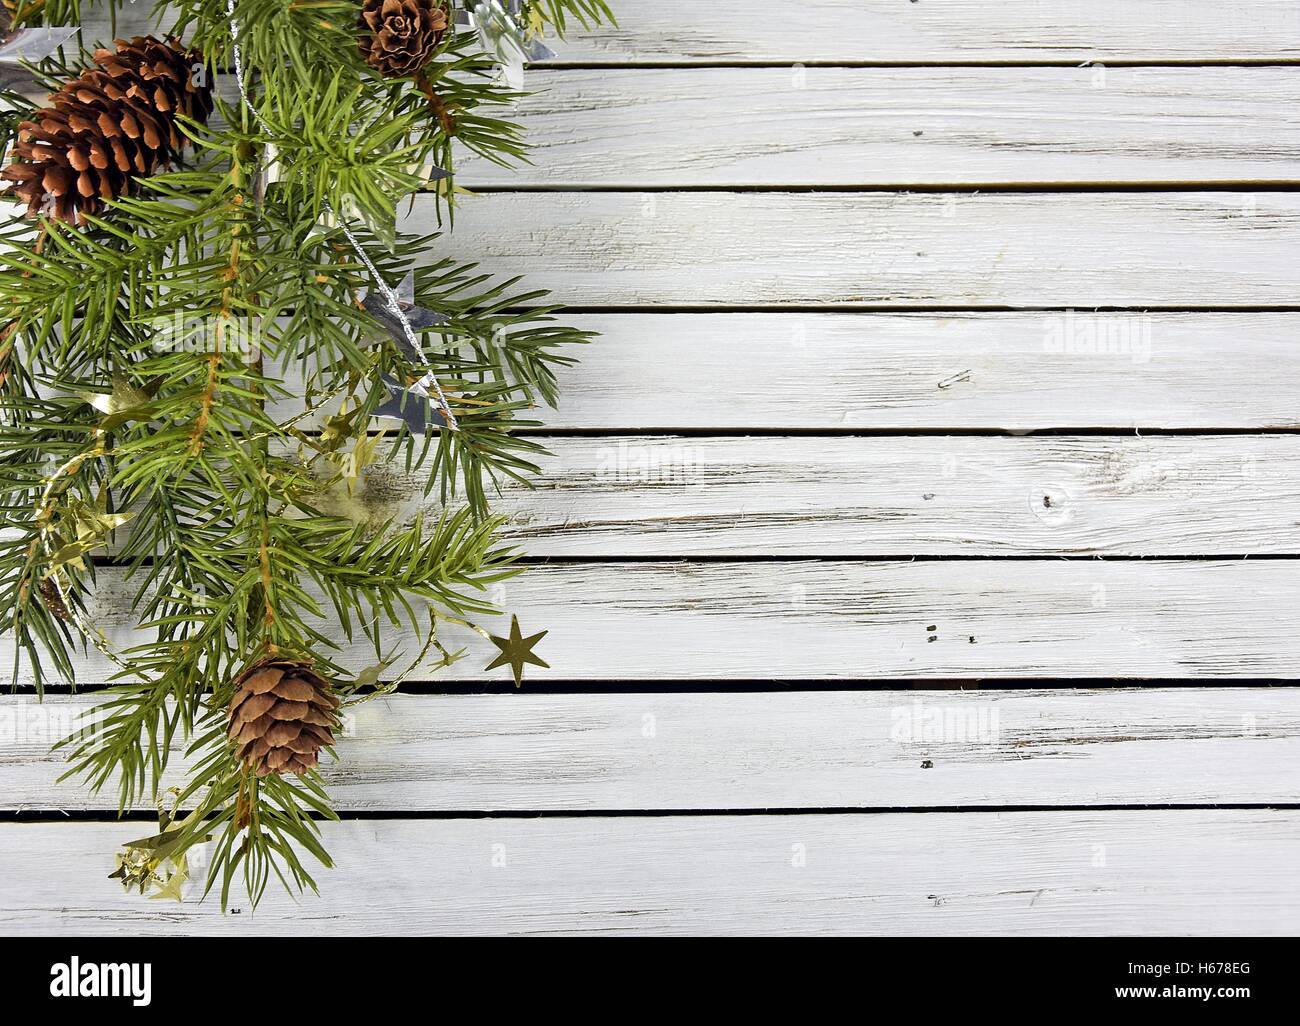 pine bough on rustic gray wood with Christmas tinsel stars Stock Photo